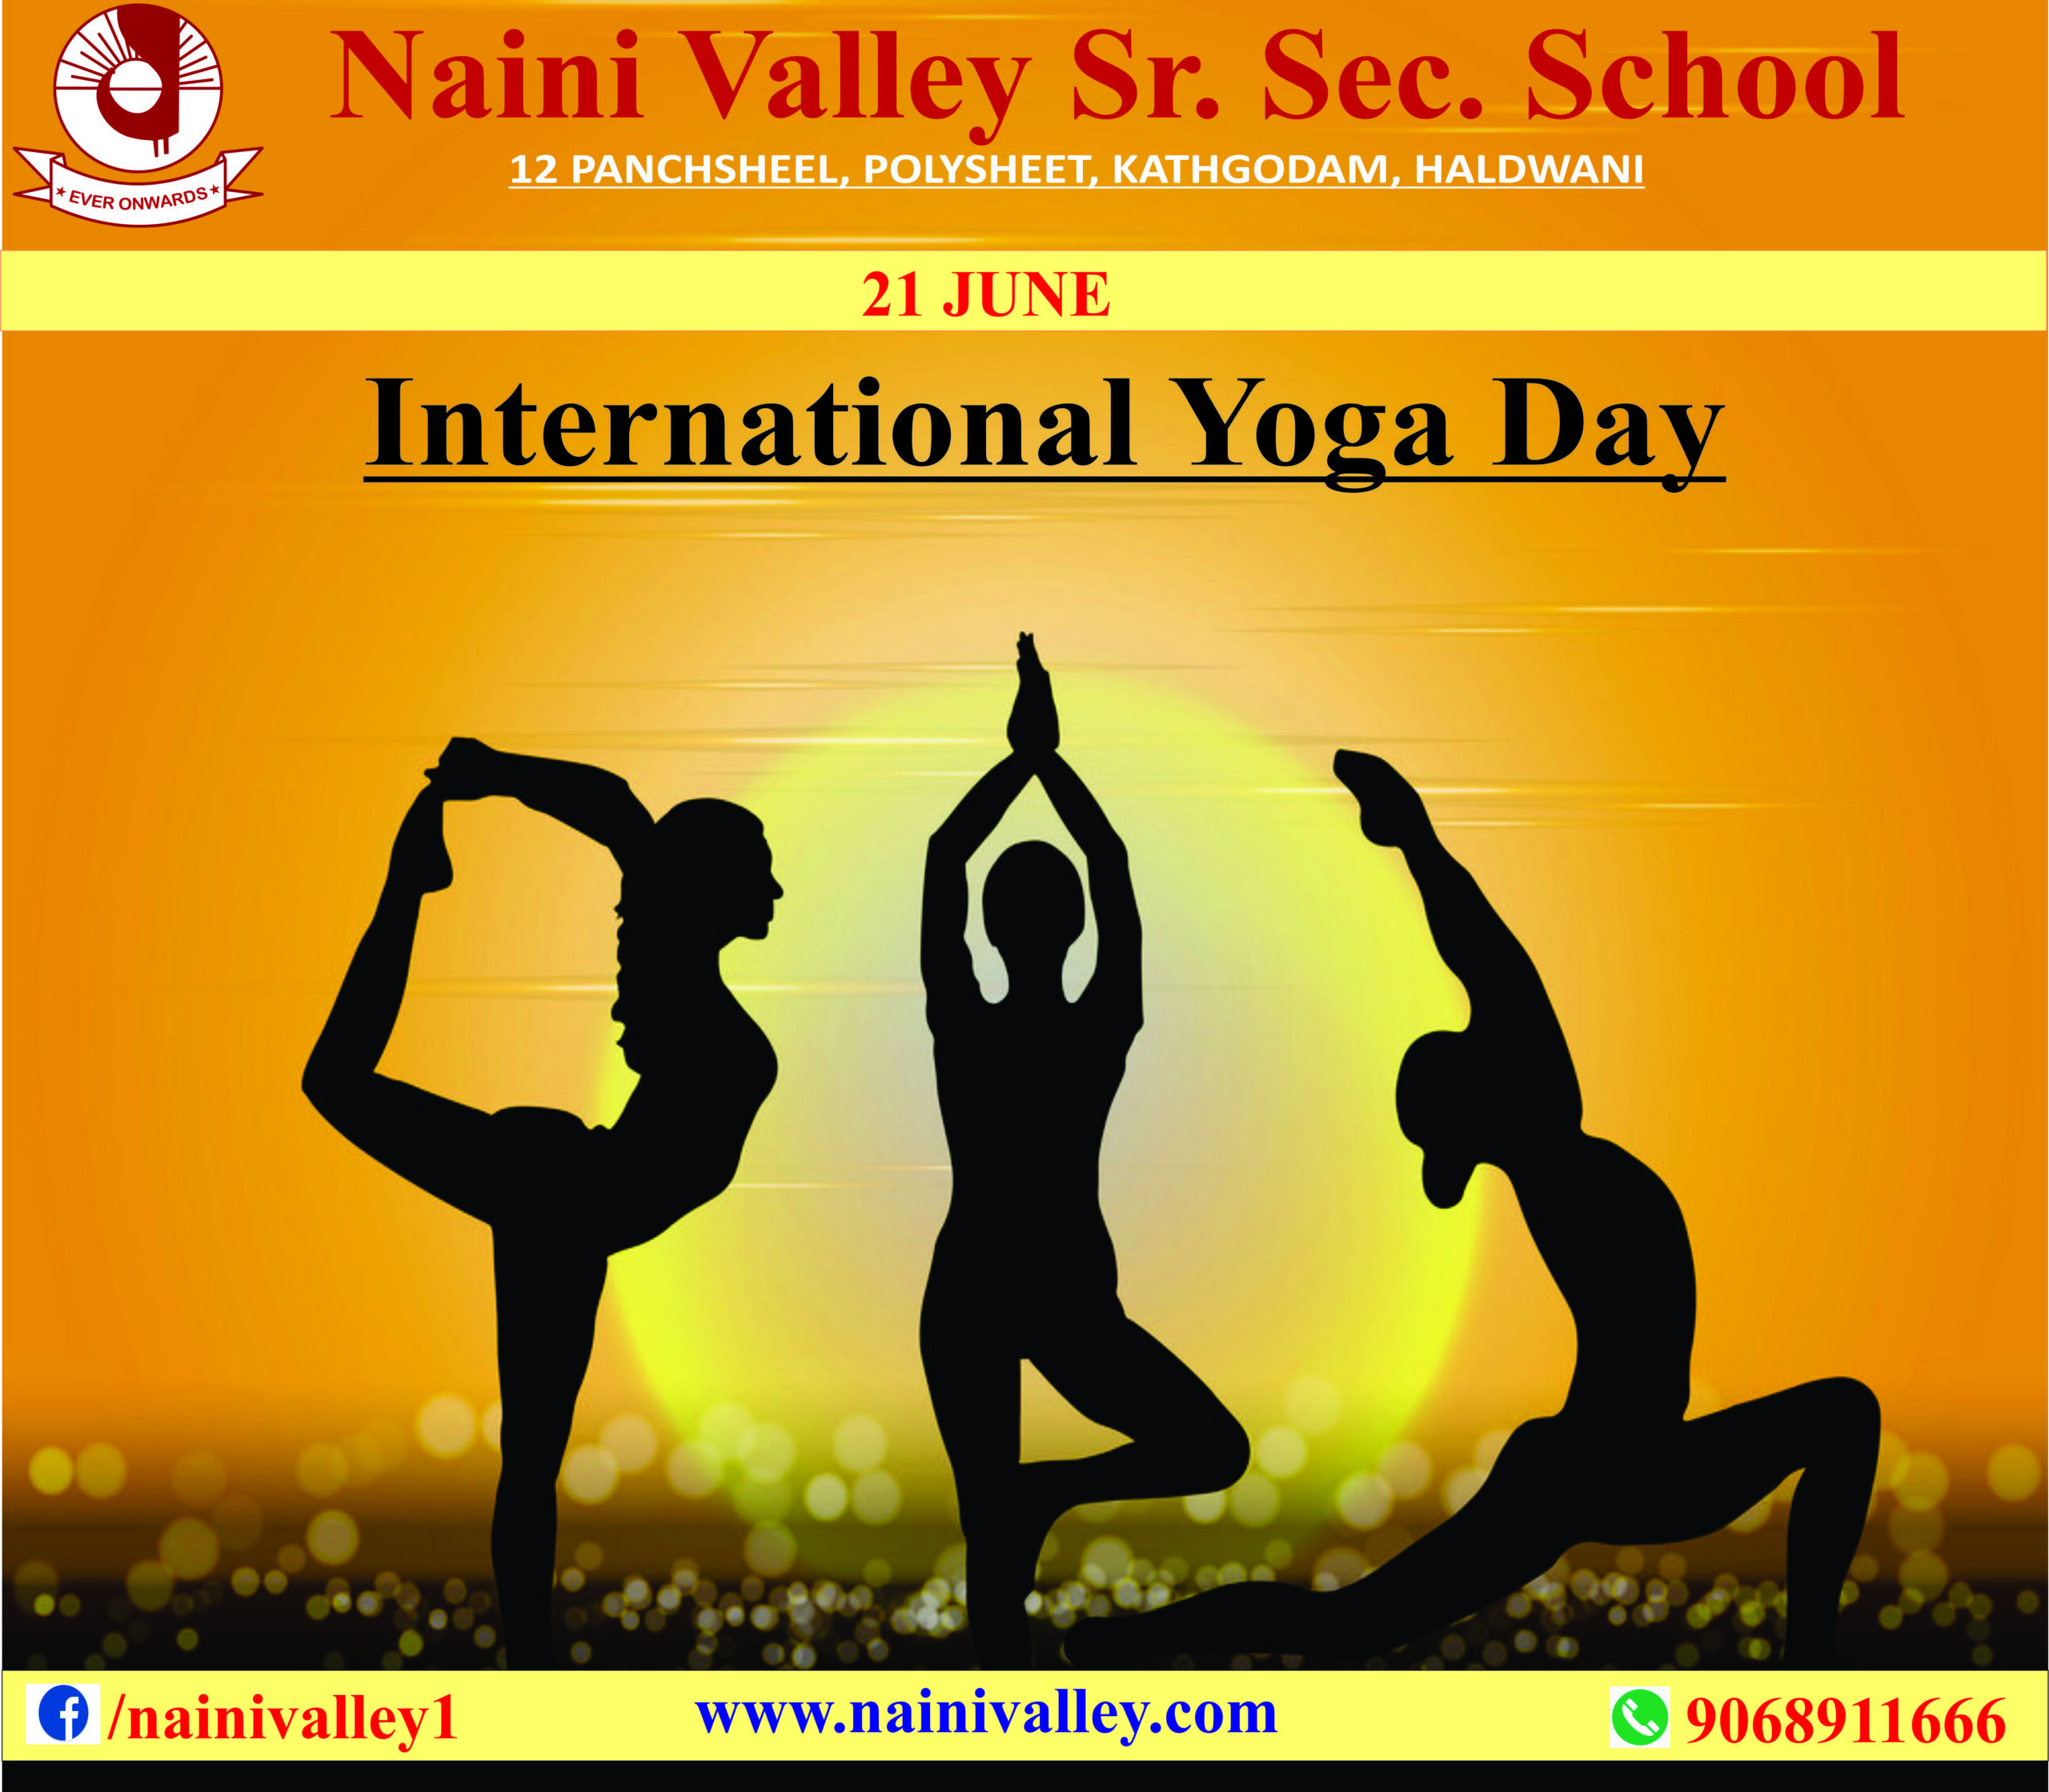 Yoga is Like Music. The Rhythm of the Body, The Melody of the Mind, and Harmony of the Soul Create the Symphony of Life. Happy International Yoga Day!